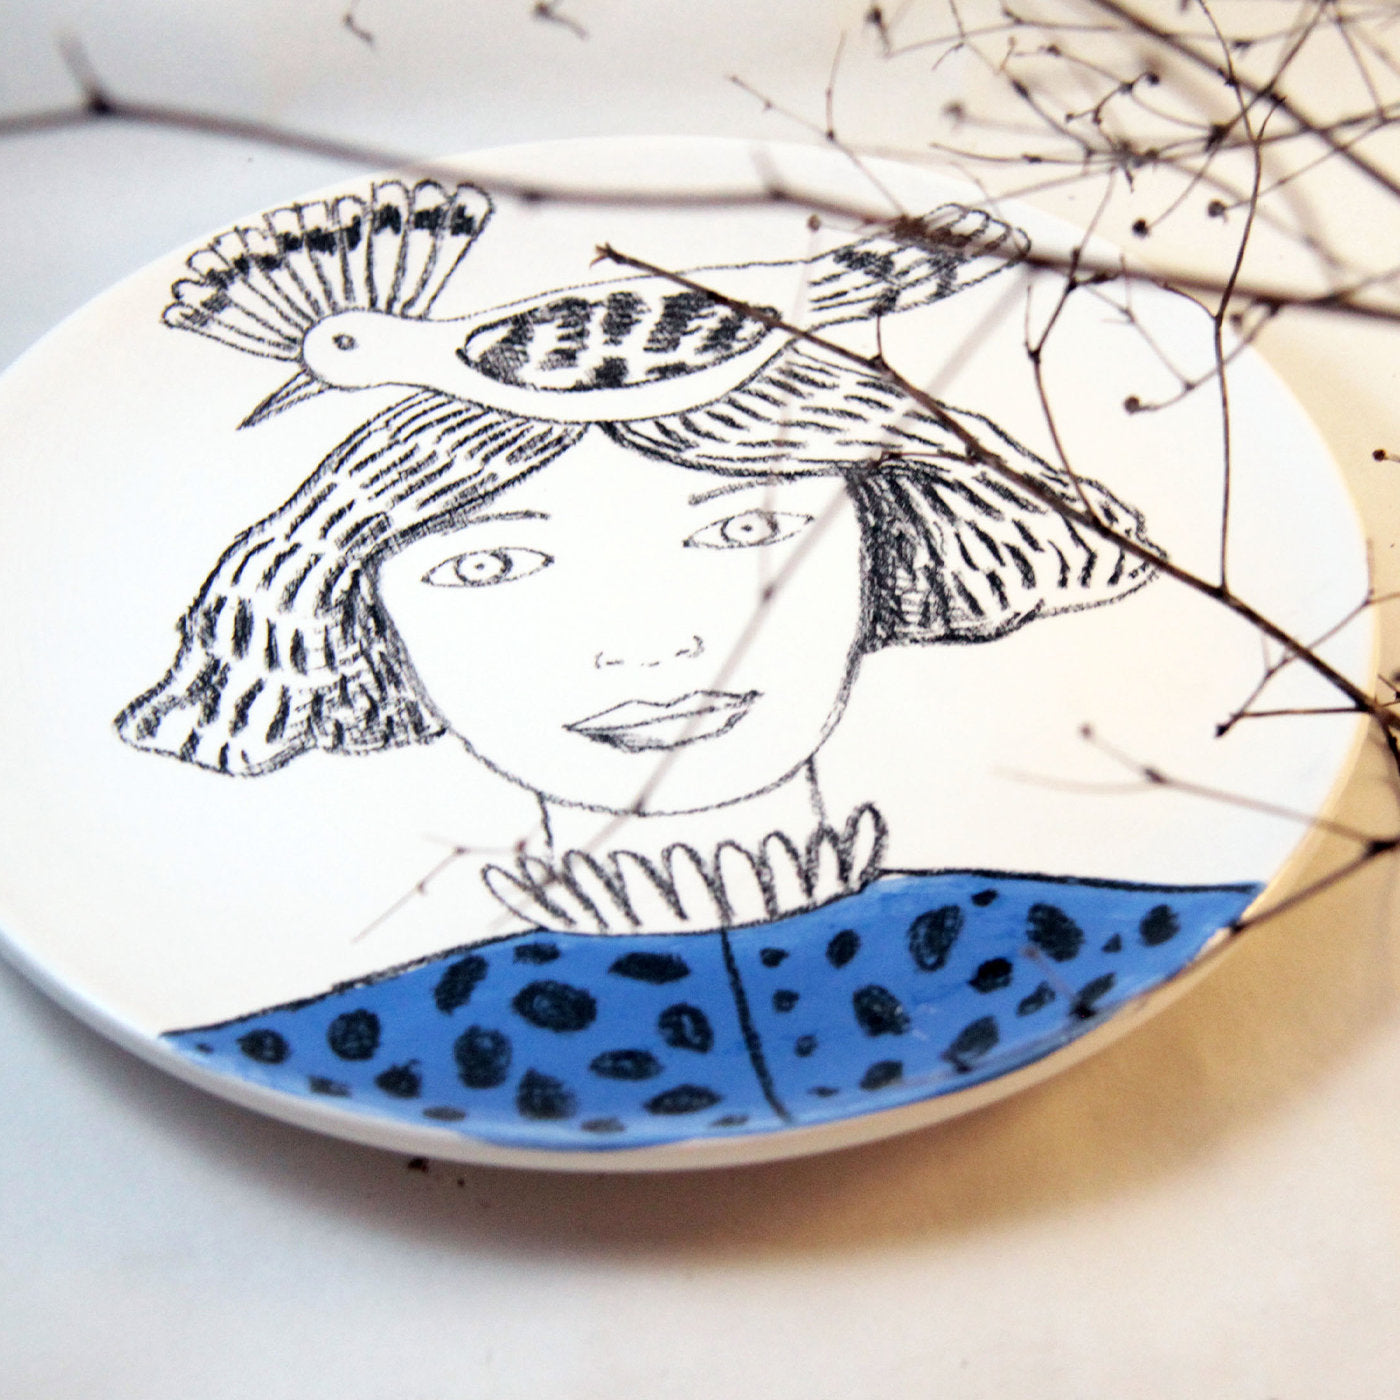 Woman with Hoopoe Decorative Plate - Alternative view 1